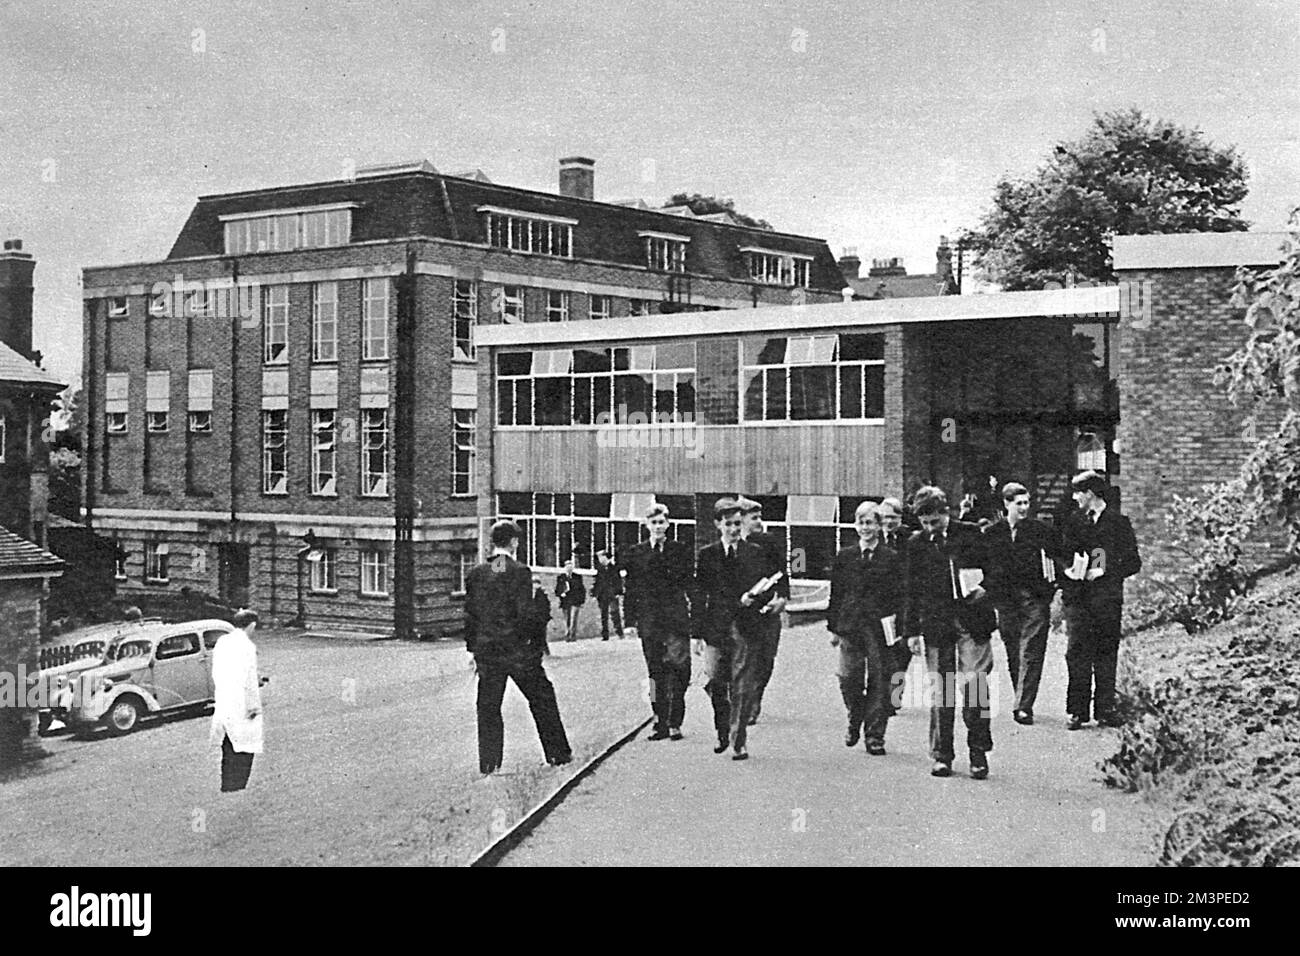 Boys leaving the new science block centre at the end of a lesson at Malvern College, an independent school in Worcestershire, England.     Date: 1958 Stock Photo